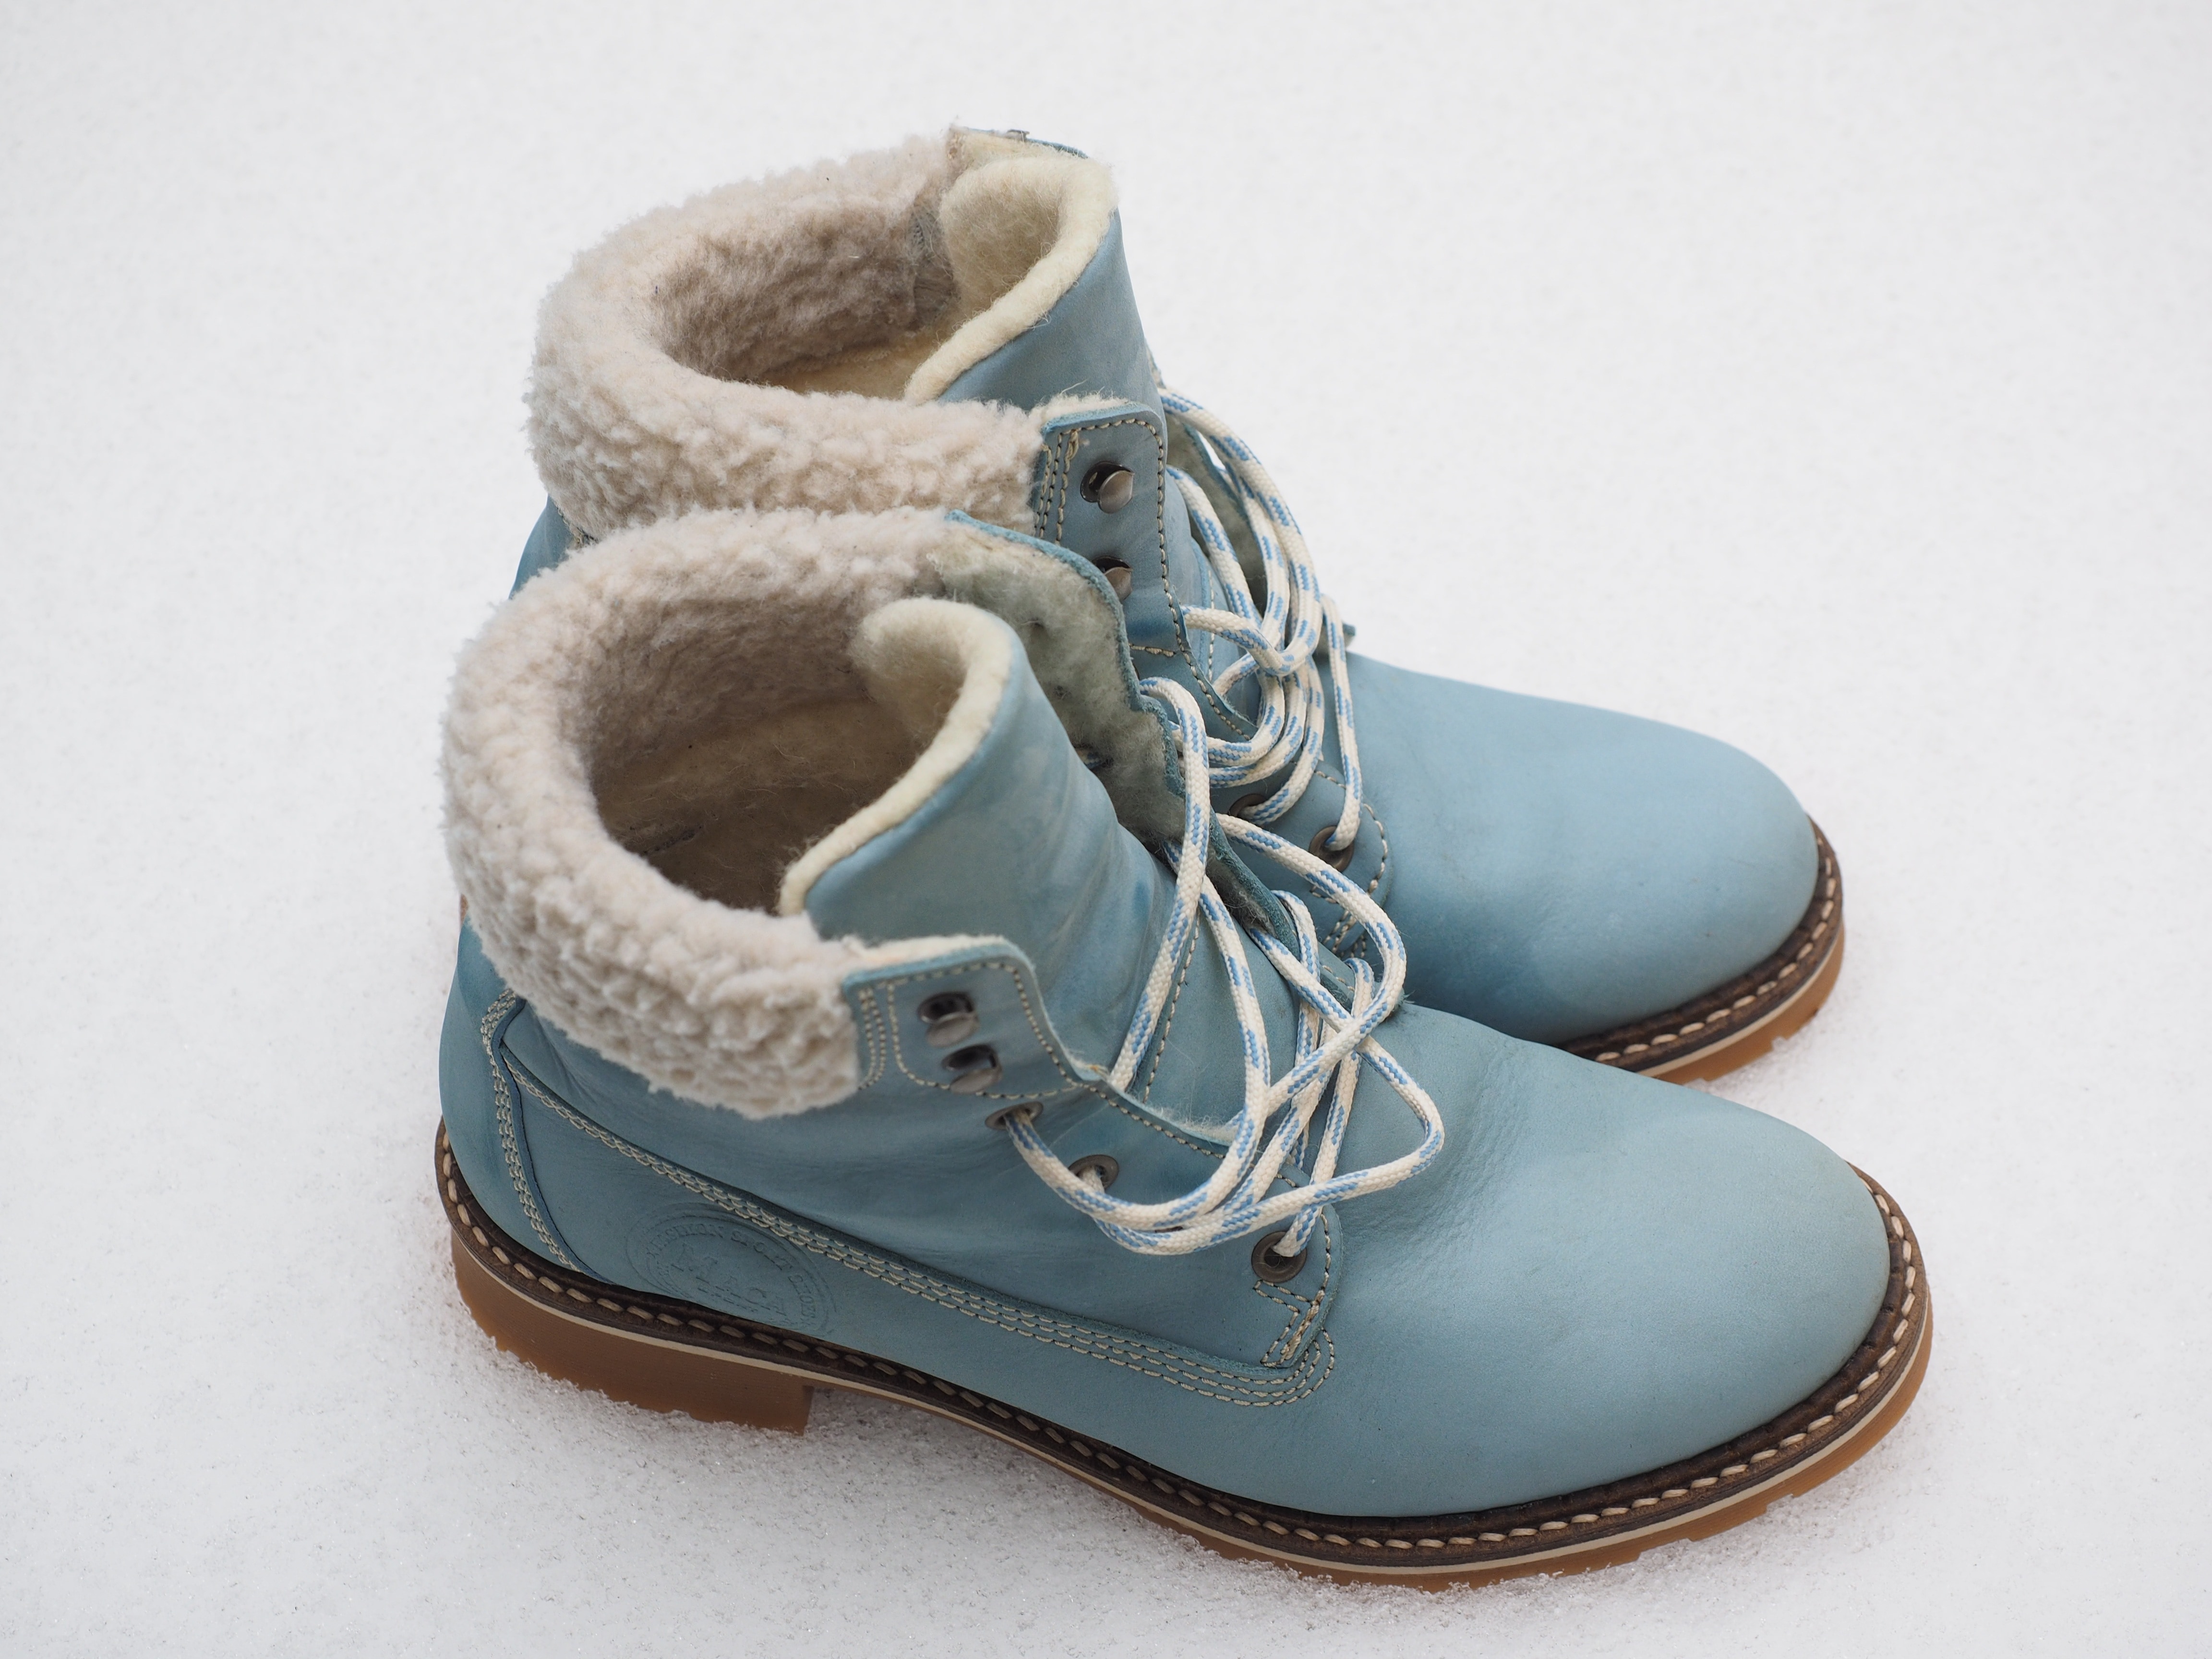 pair of blue leather winter boots